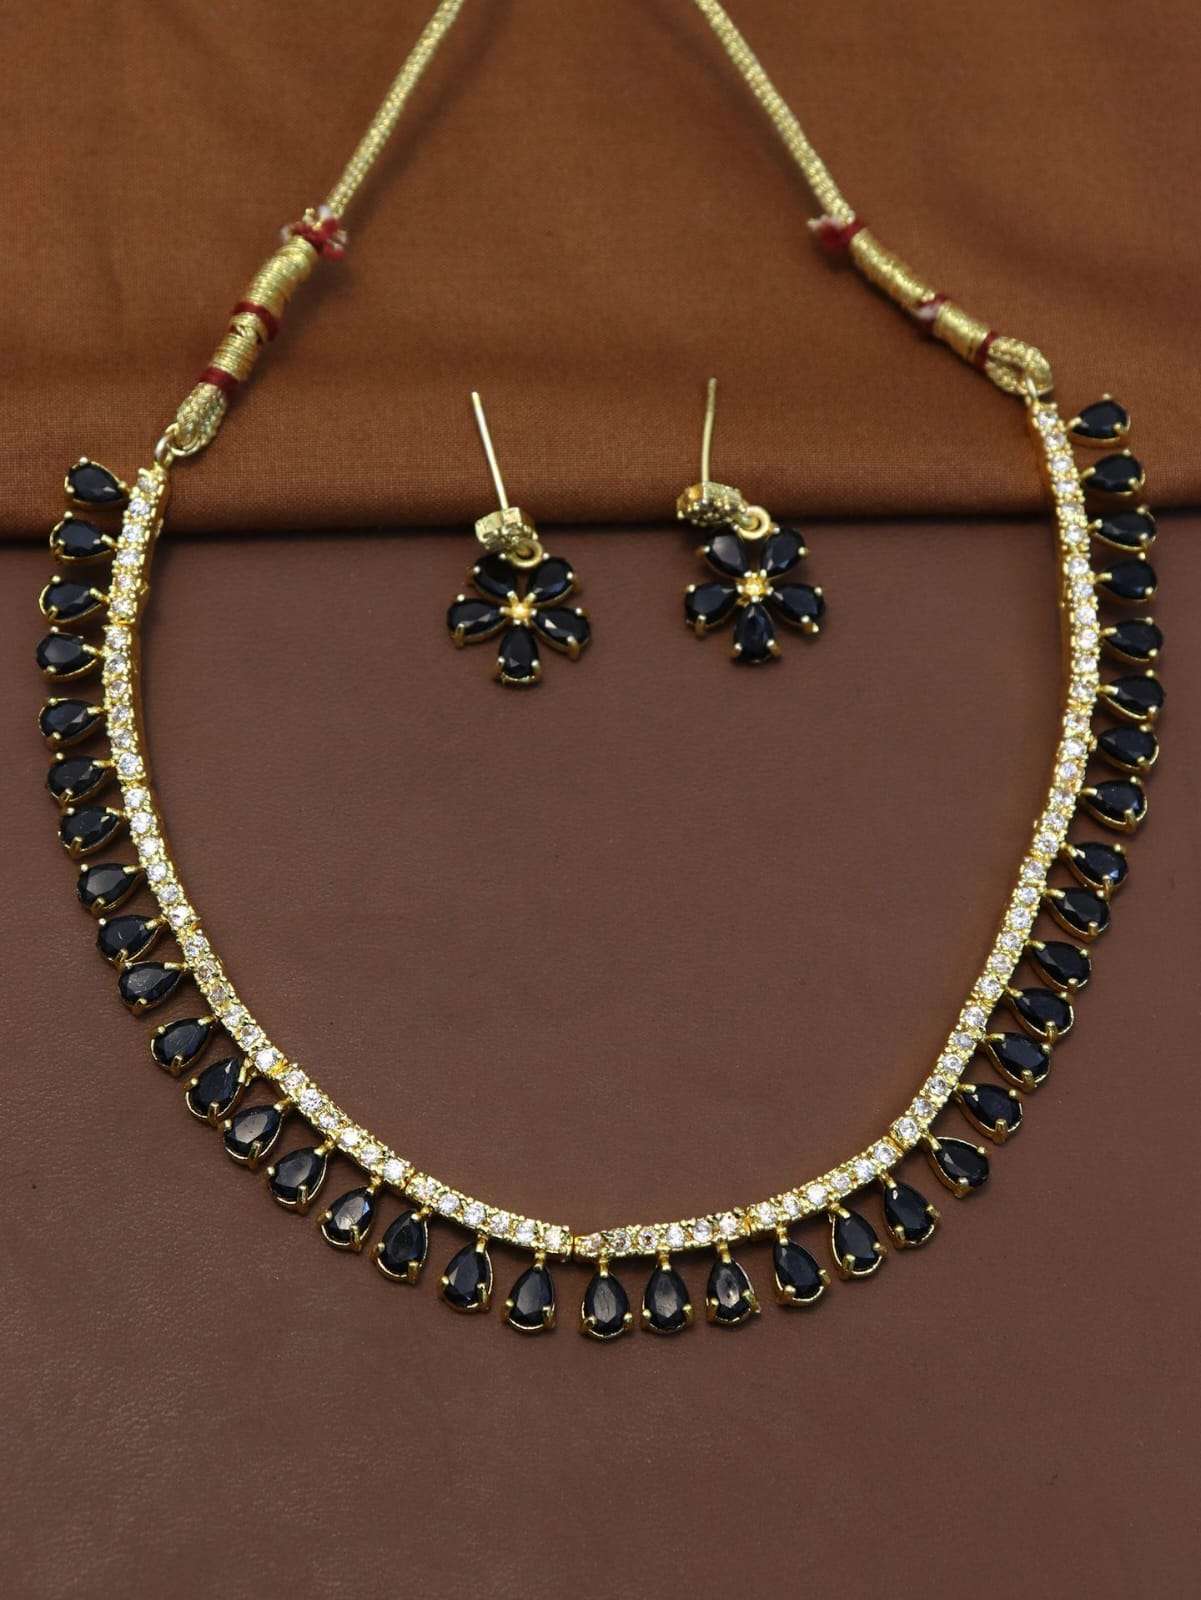 S-320 BY FASHID WHOLESALE TRADITIONAL IMITATION JEWELLERY FOR INDIAN ATTIRE AT EXCLUSIVE RANGE.